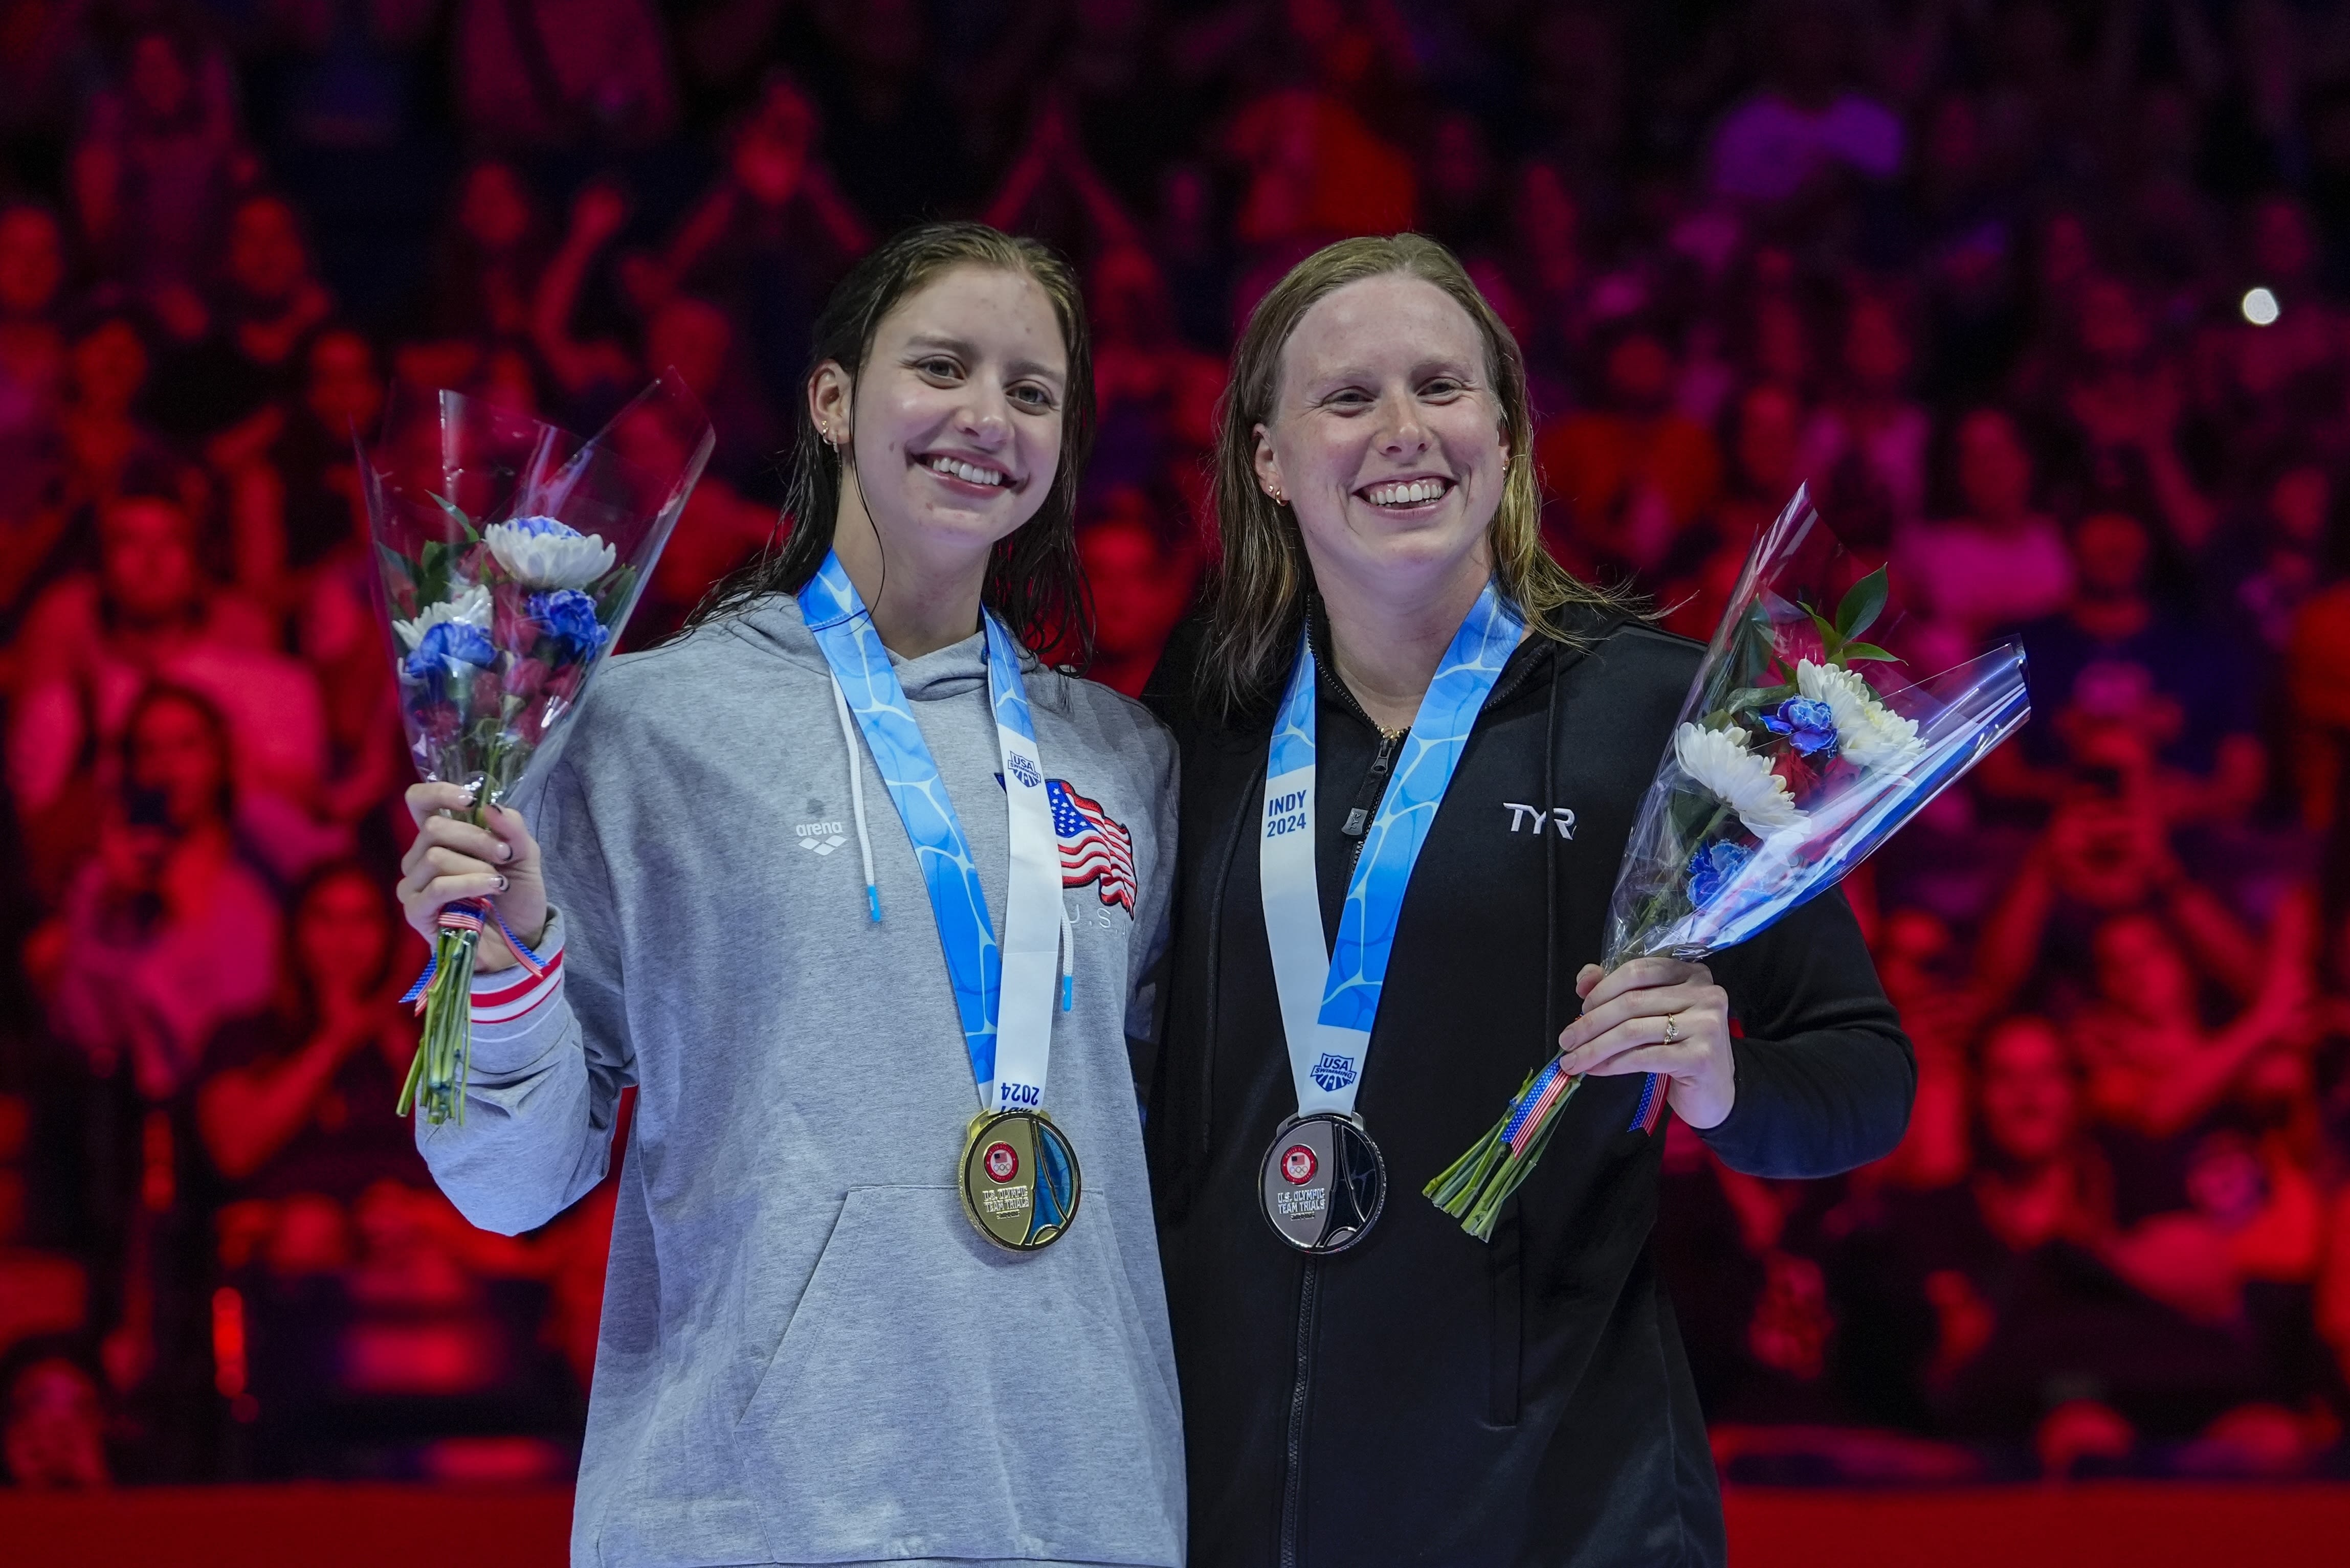 On a night for doubling up, Lilly King also takes home an engagement ring